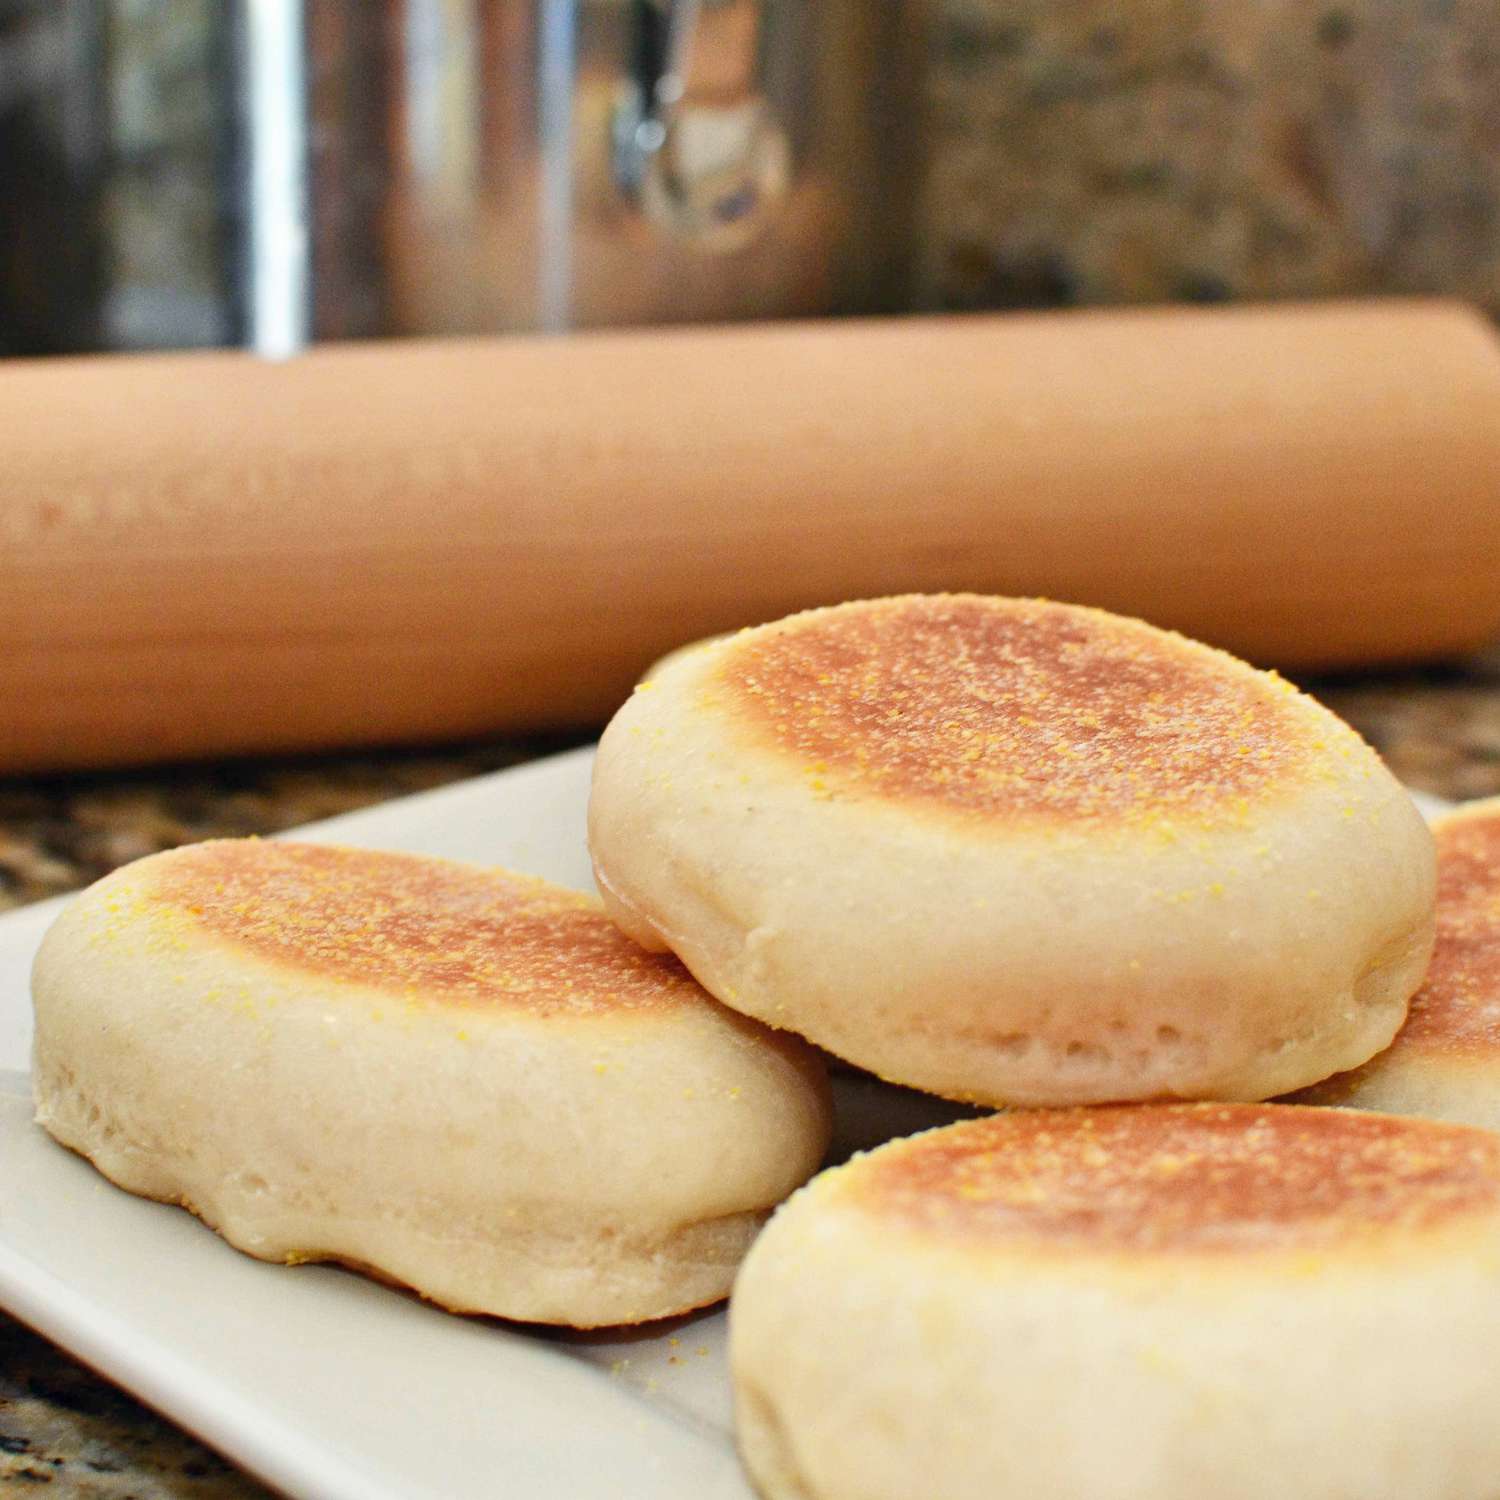 close up view of English Muffins on a plate with a wooden rolling pin in the background